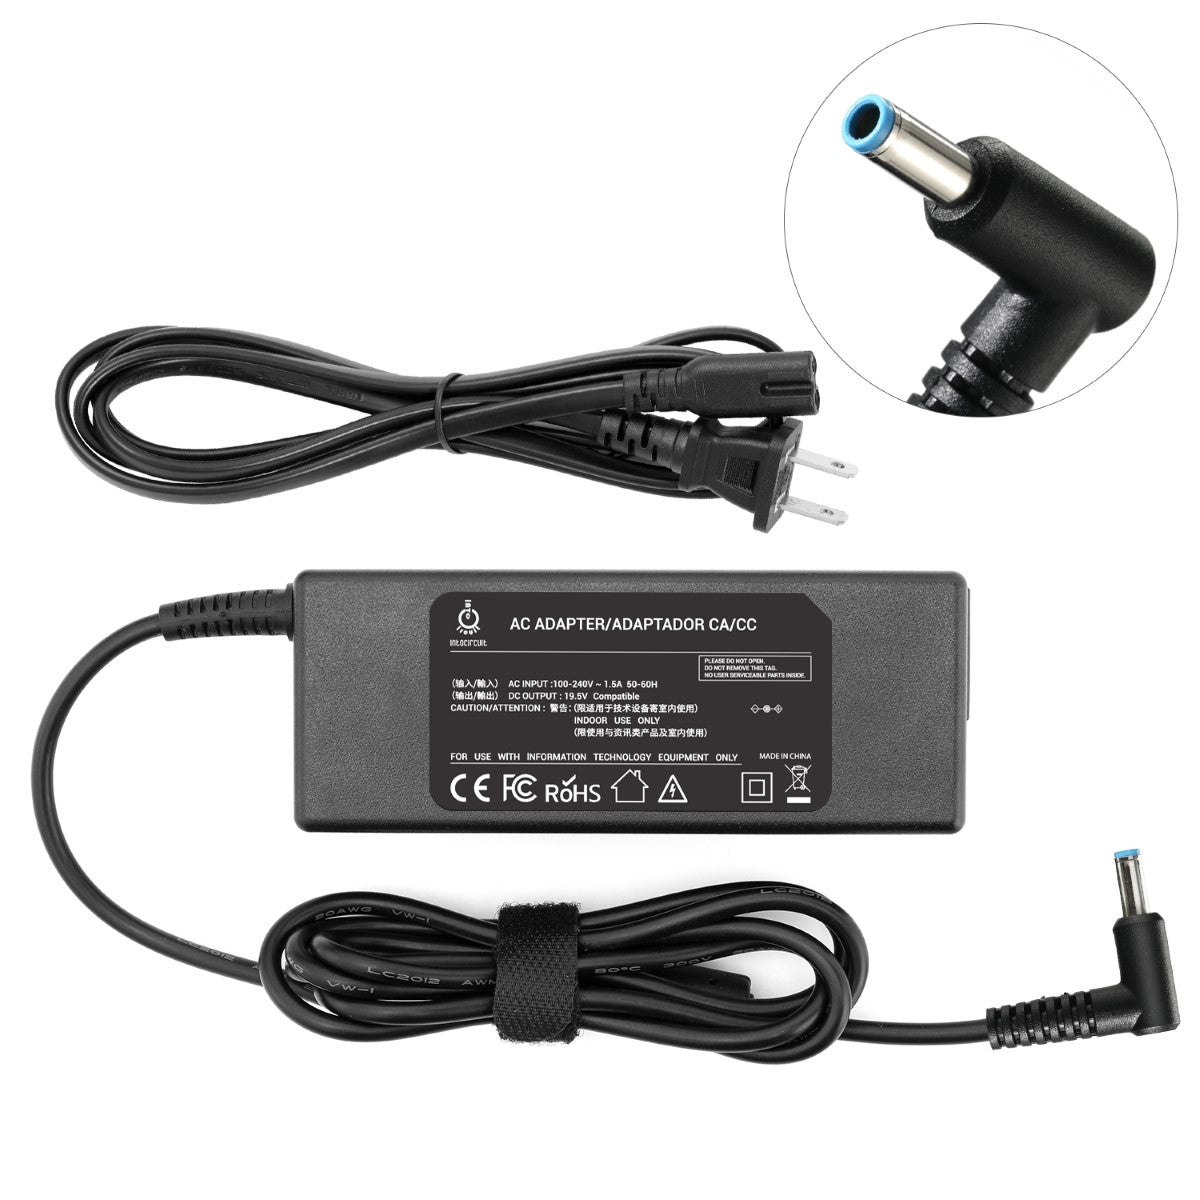 Charger for HP Envy m7-n011dx Laptop